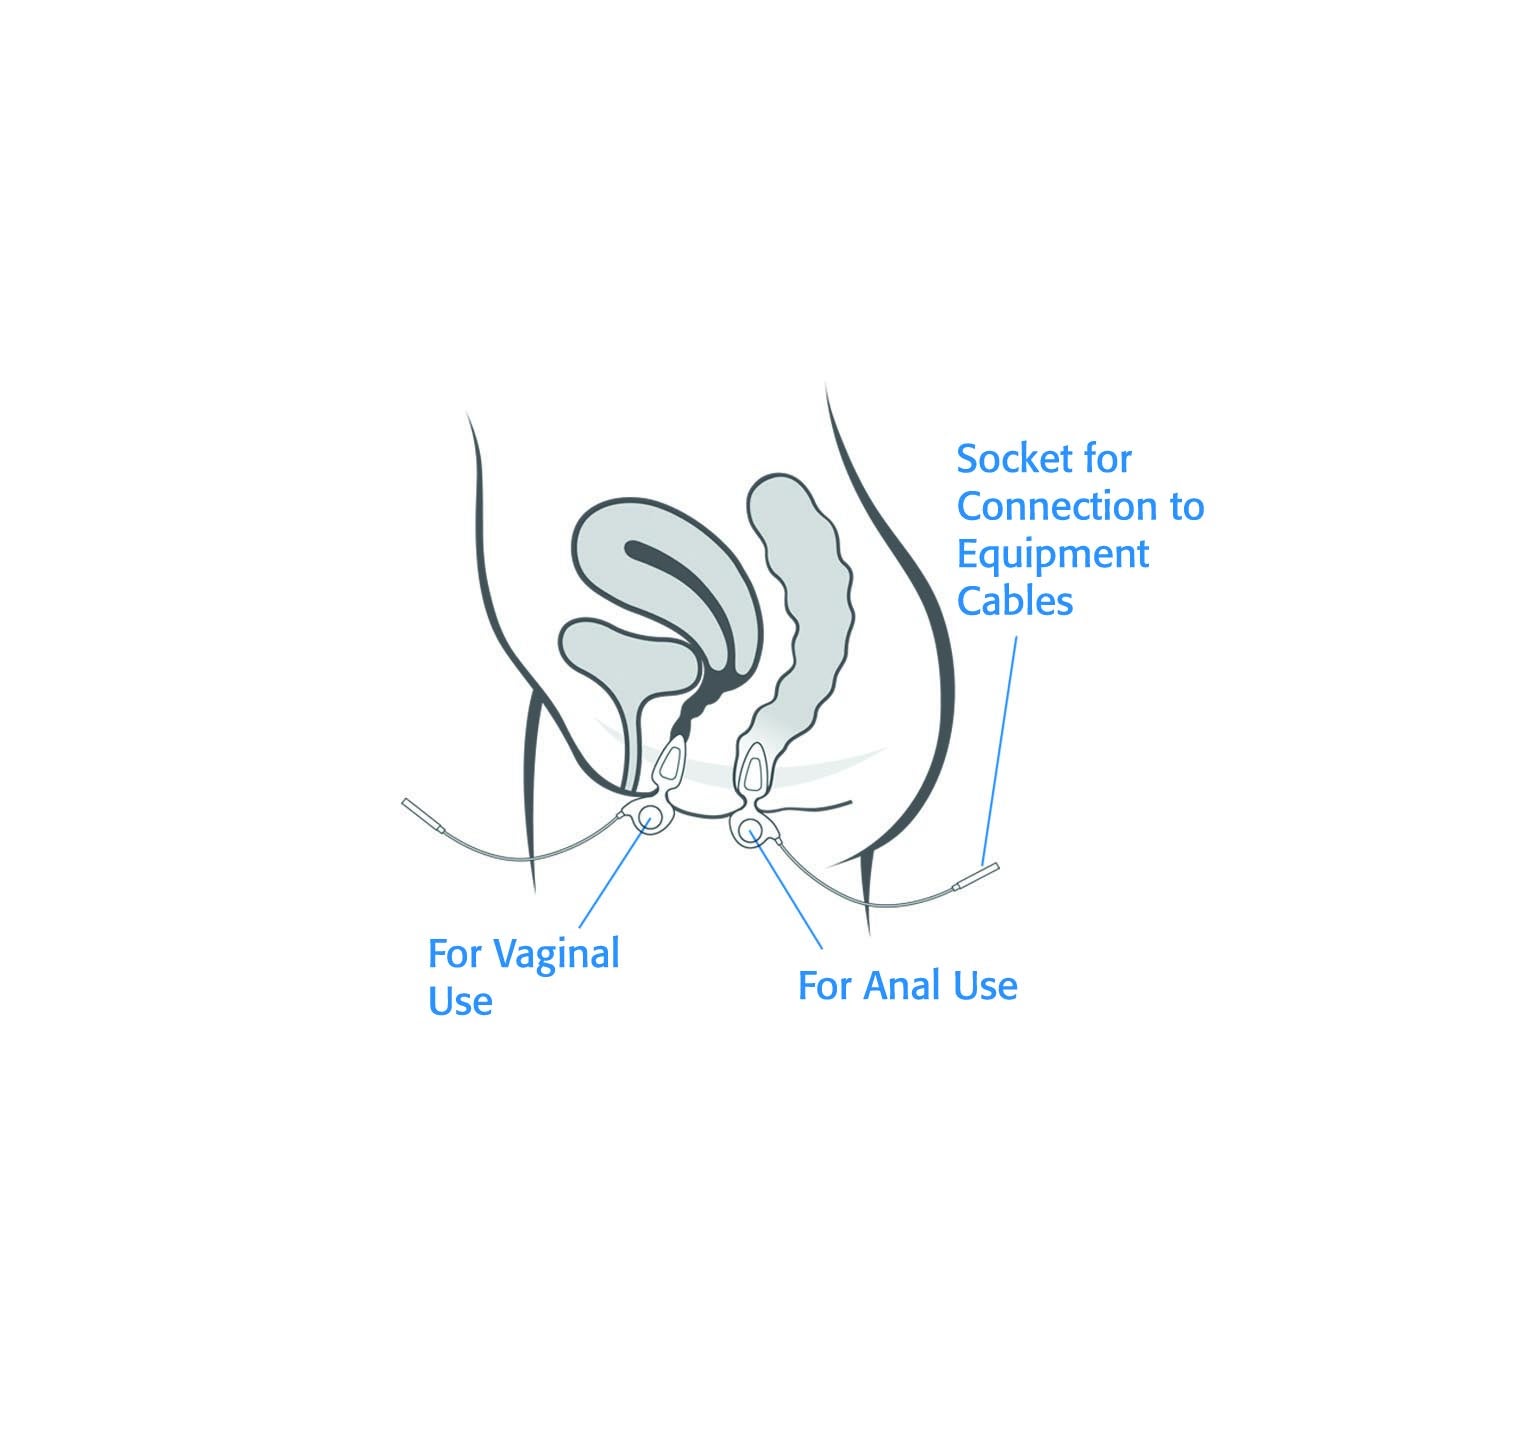 Anuform® Intra-Anal and Small Intra-Vaginal Probe